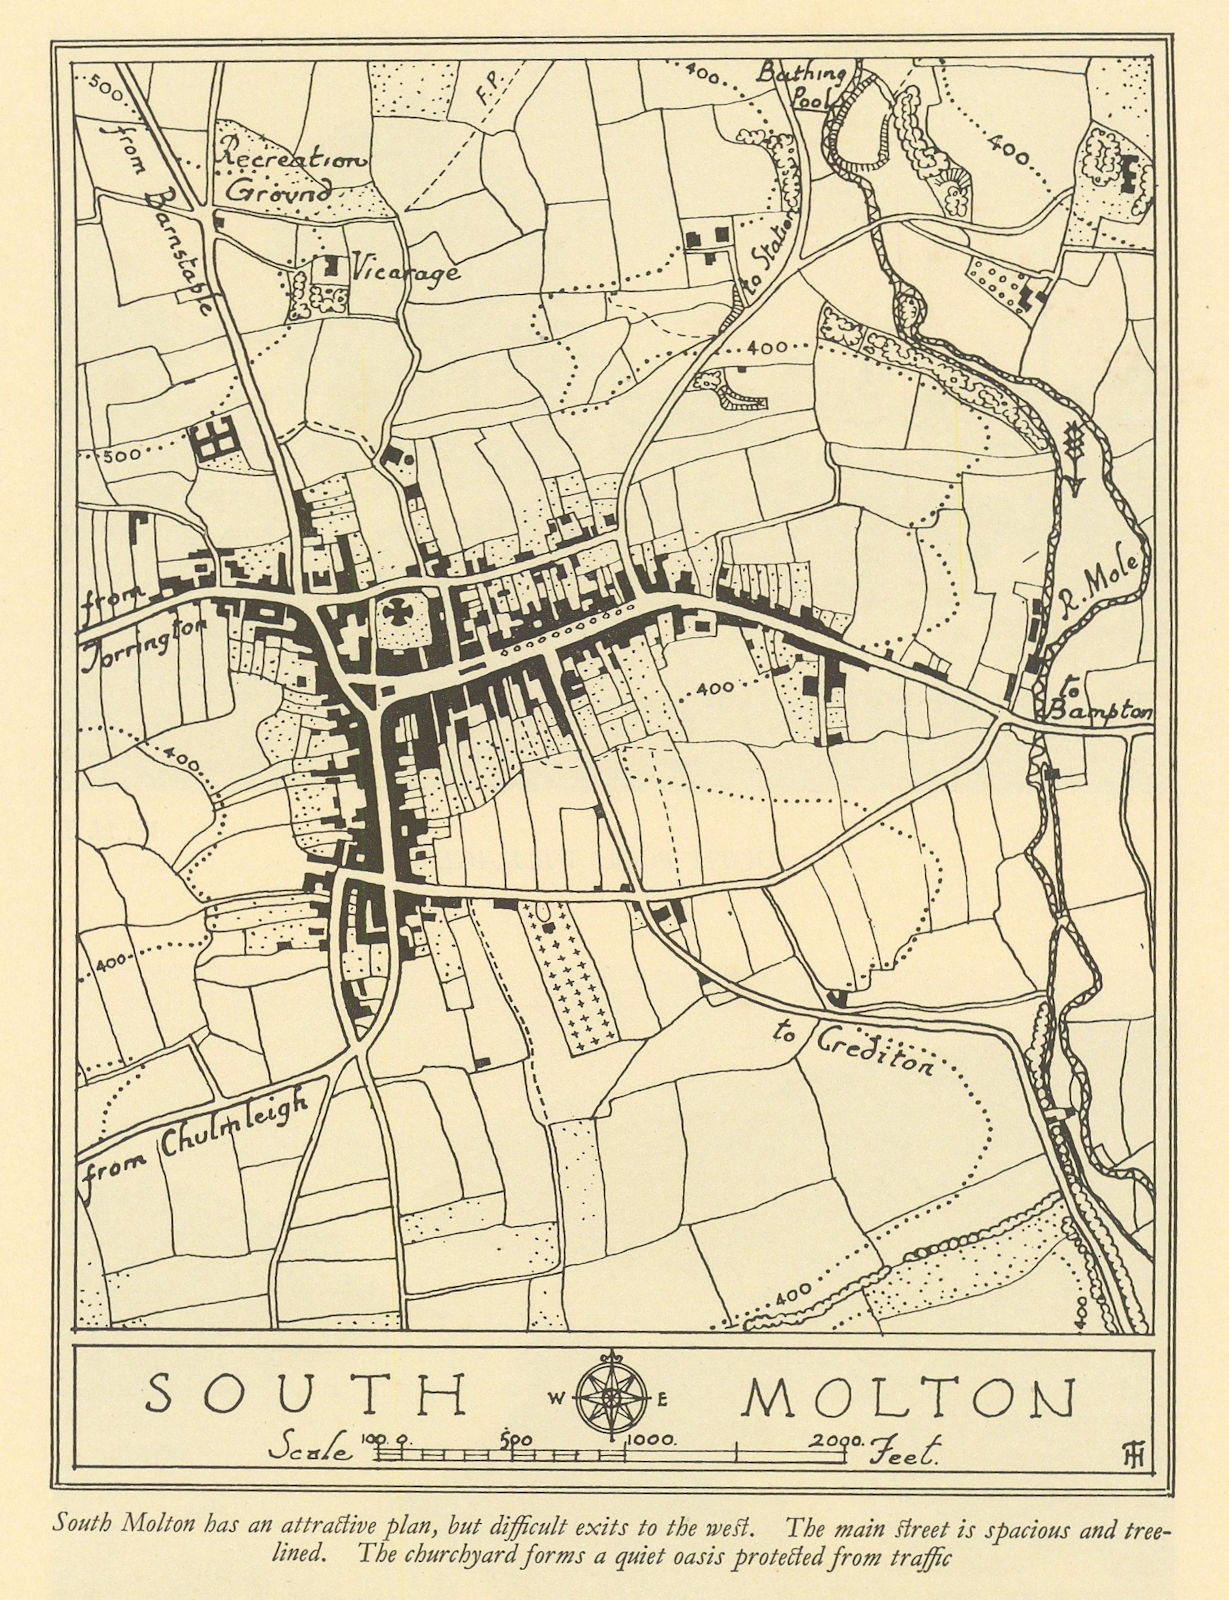 Associate Product Town plan of SOUTH MOLTON Devon by William Harding Thompson 1932 old map